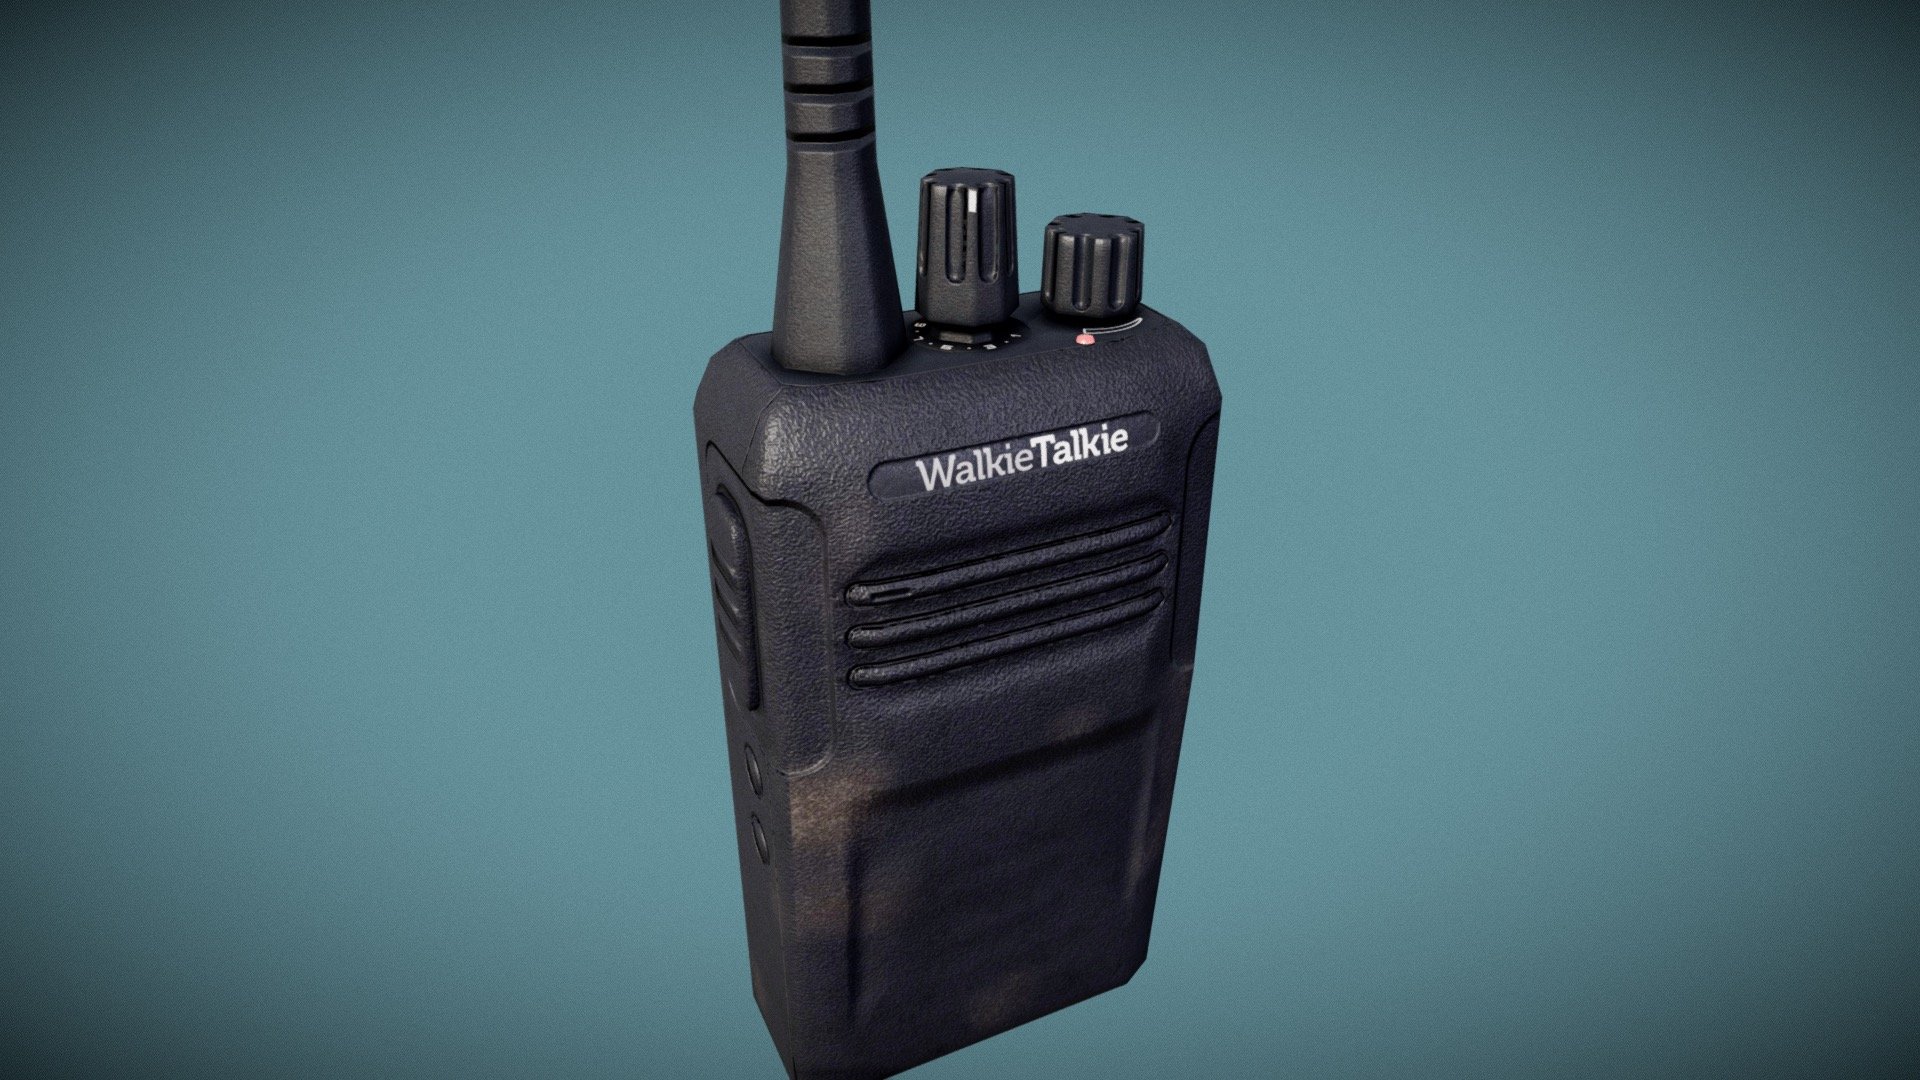 Low poly Walkie Talkie model optimized for VR.
Modeled in Cinema 4D and textured in Substance Painter 3d model